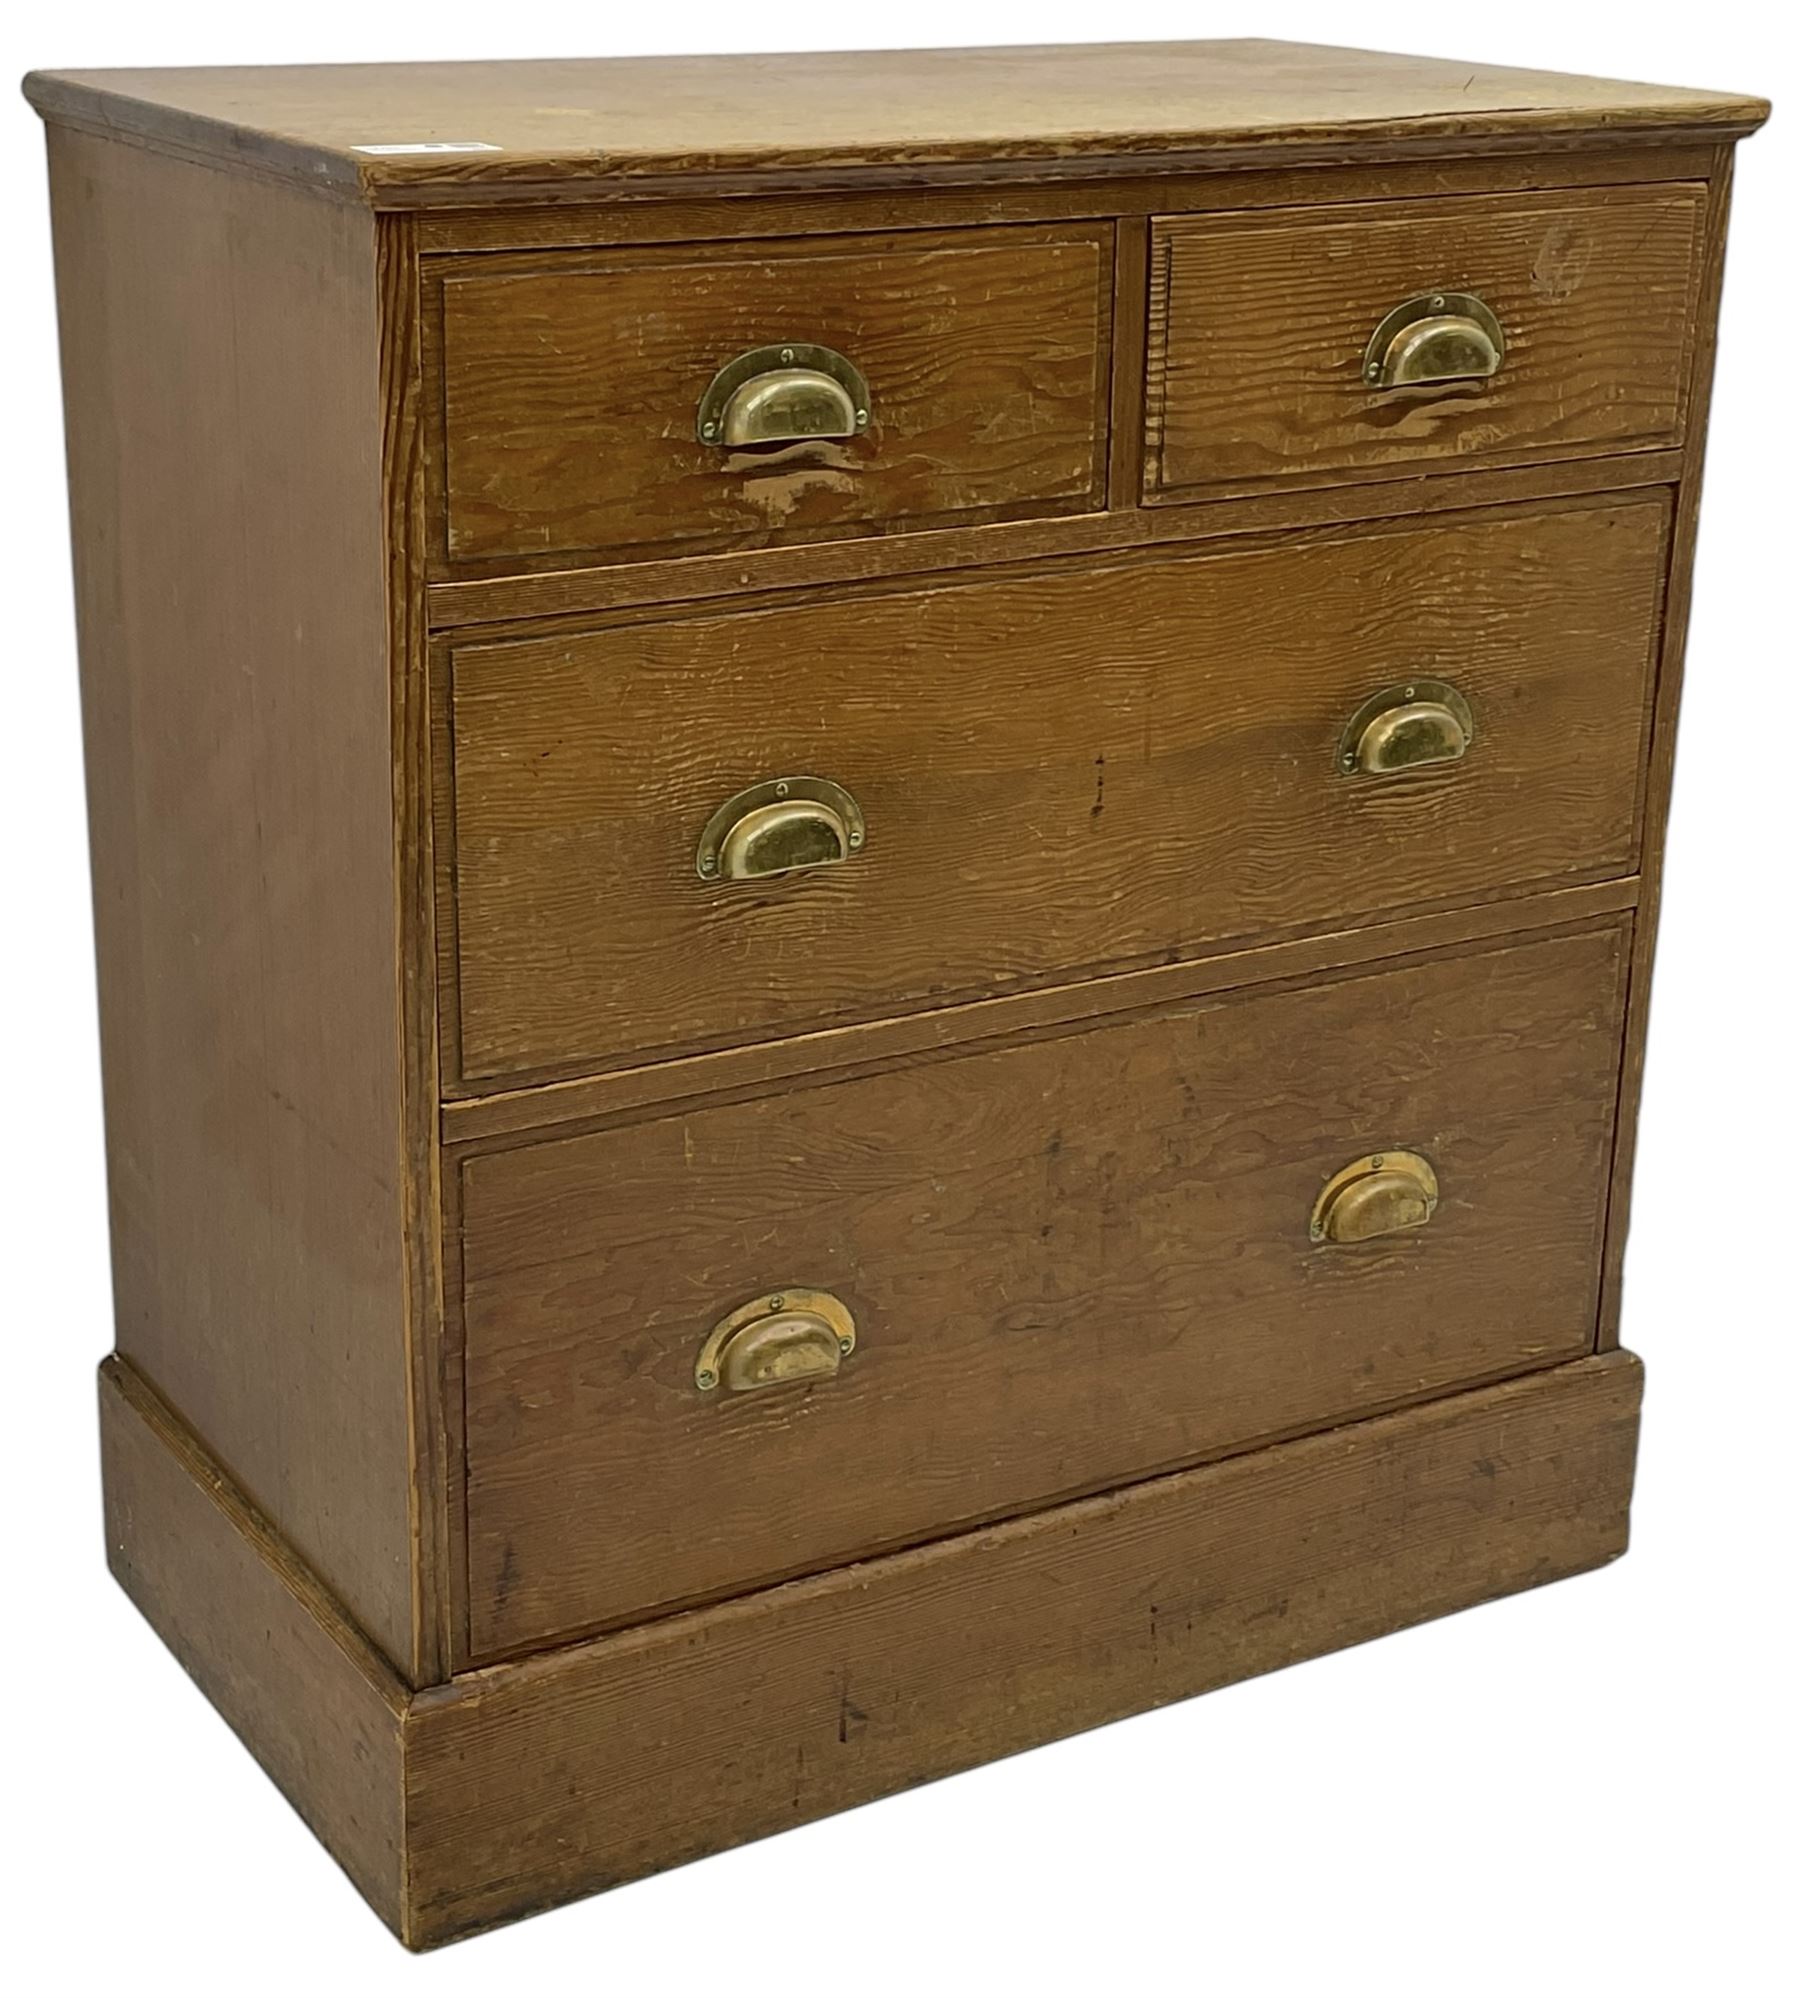 Victorian pitch pine chest - Image 3 of 5